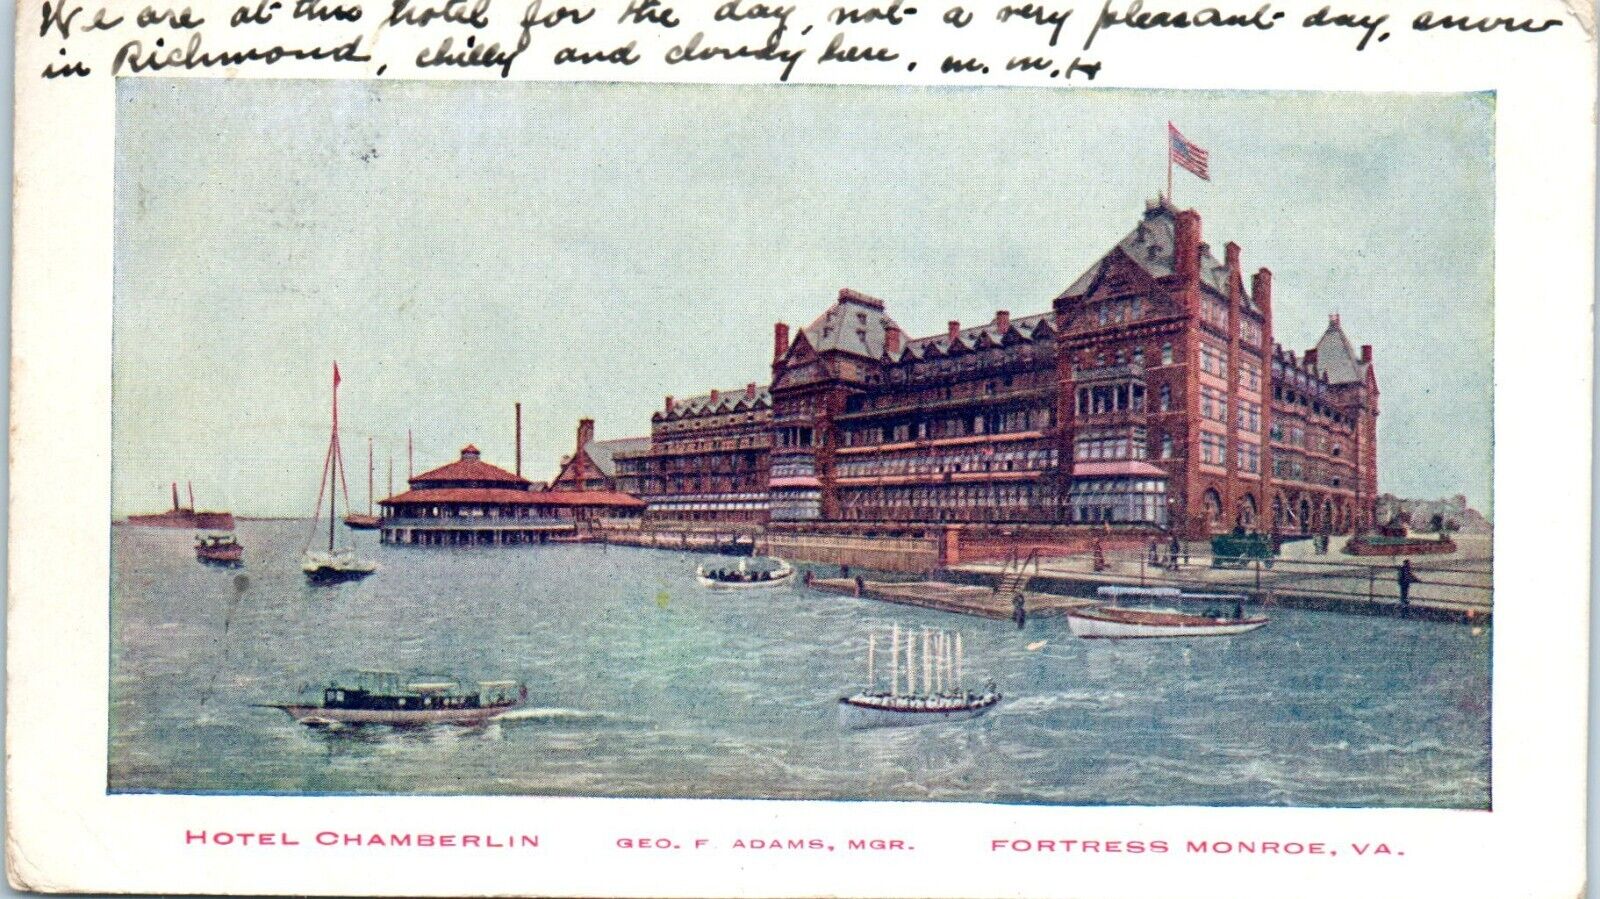 Private Mailing Card, Hotel Chamberlin, Fortress Monroe, Virginia